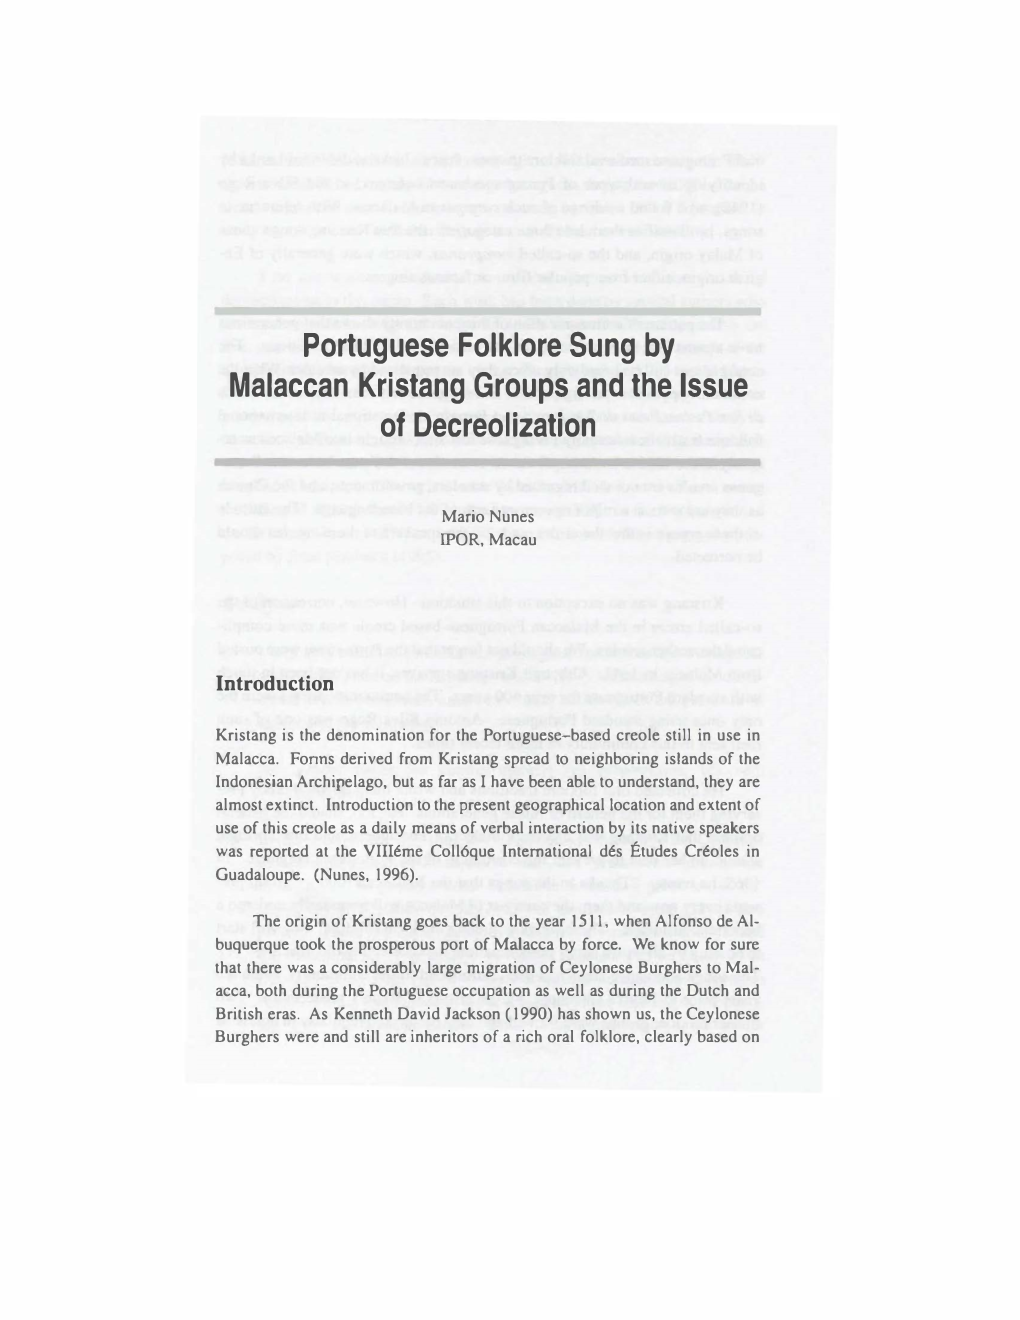 Portuguese Folklore Sung by Malaccan Kristang Groups and the Issue of Decreolization